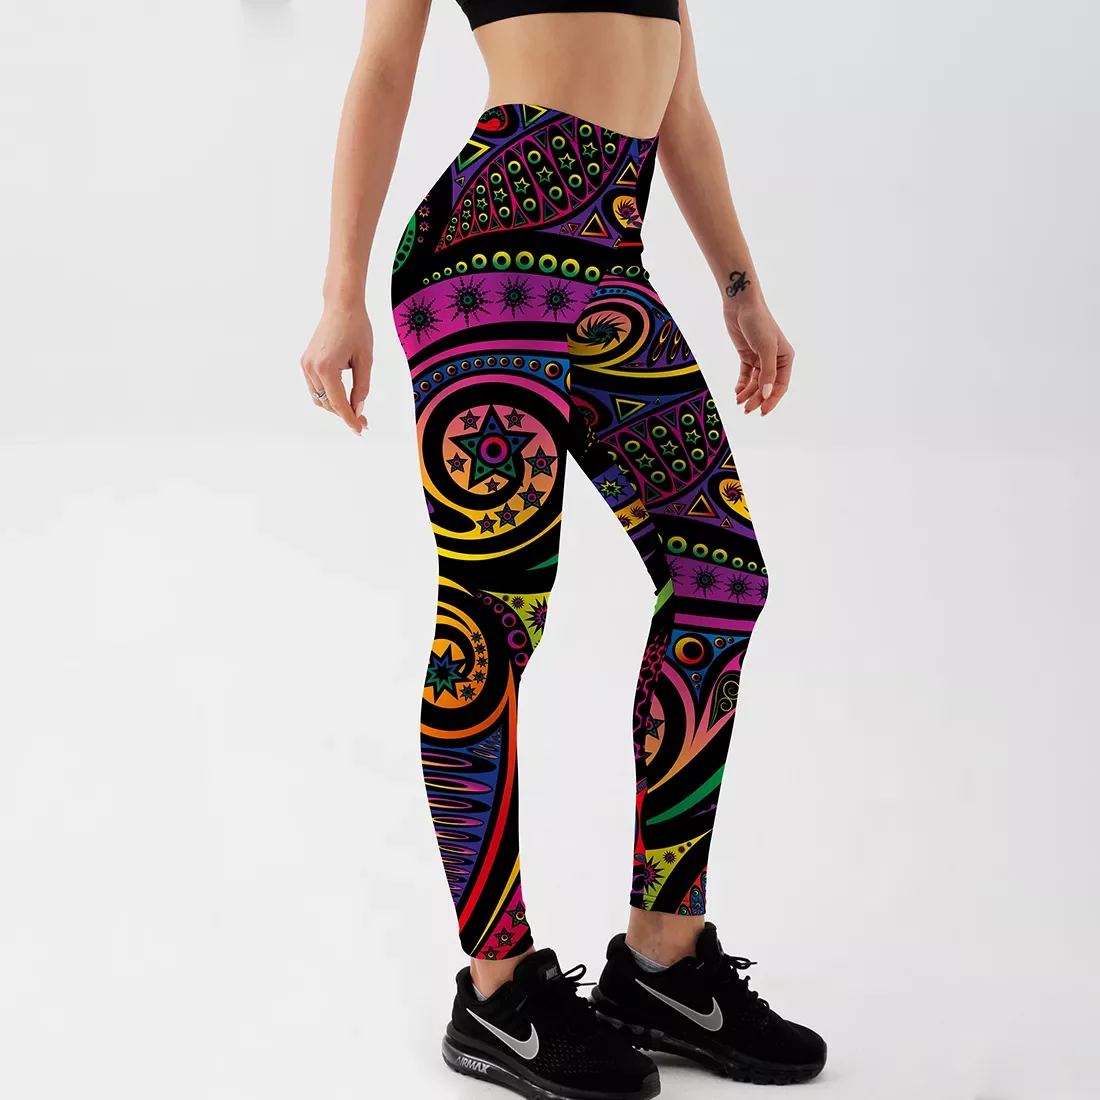 New in Summer Pants Color Totem Printed Black Sexy Leggings Plus Size Casual Street Wear High Waist Leggings jackets    golf